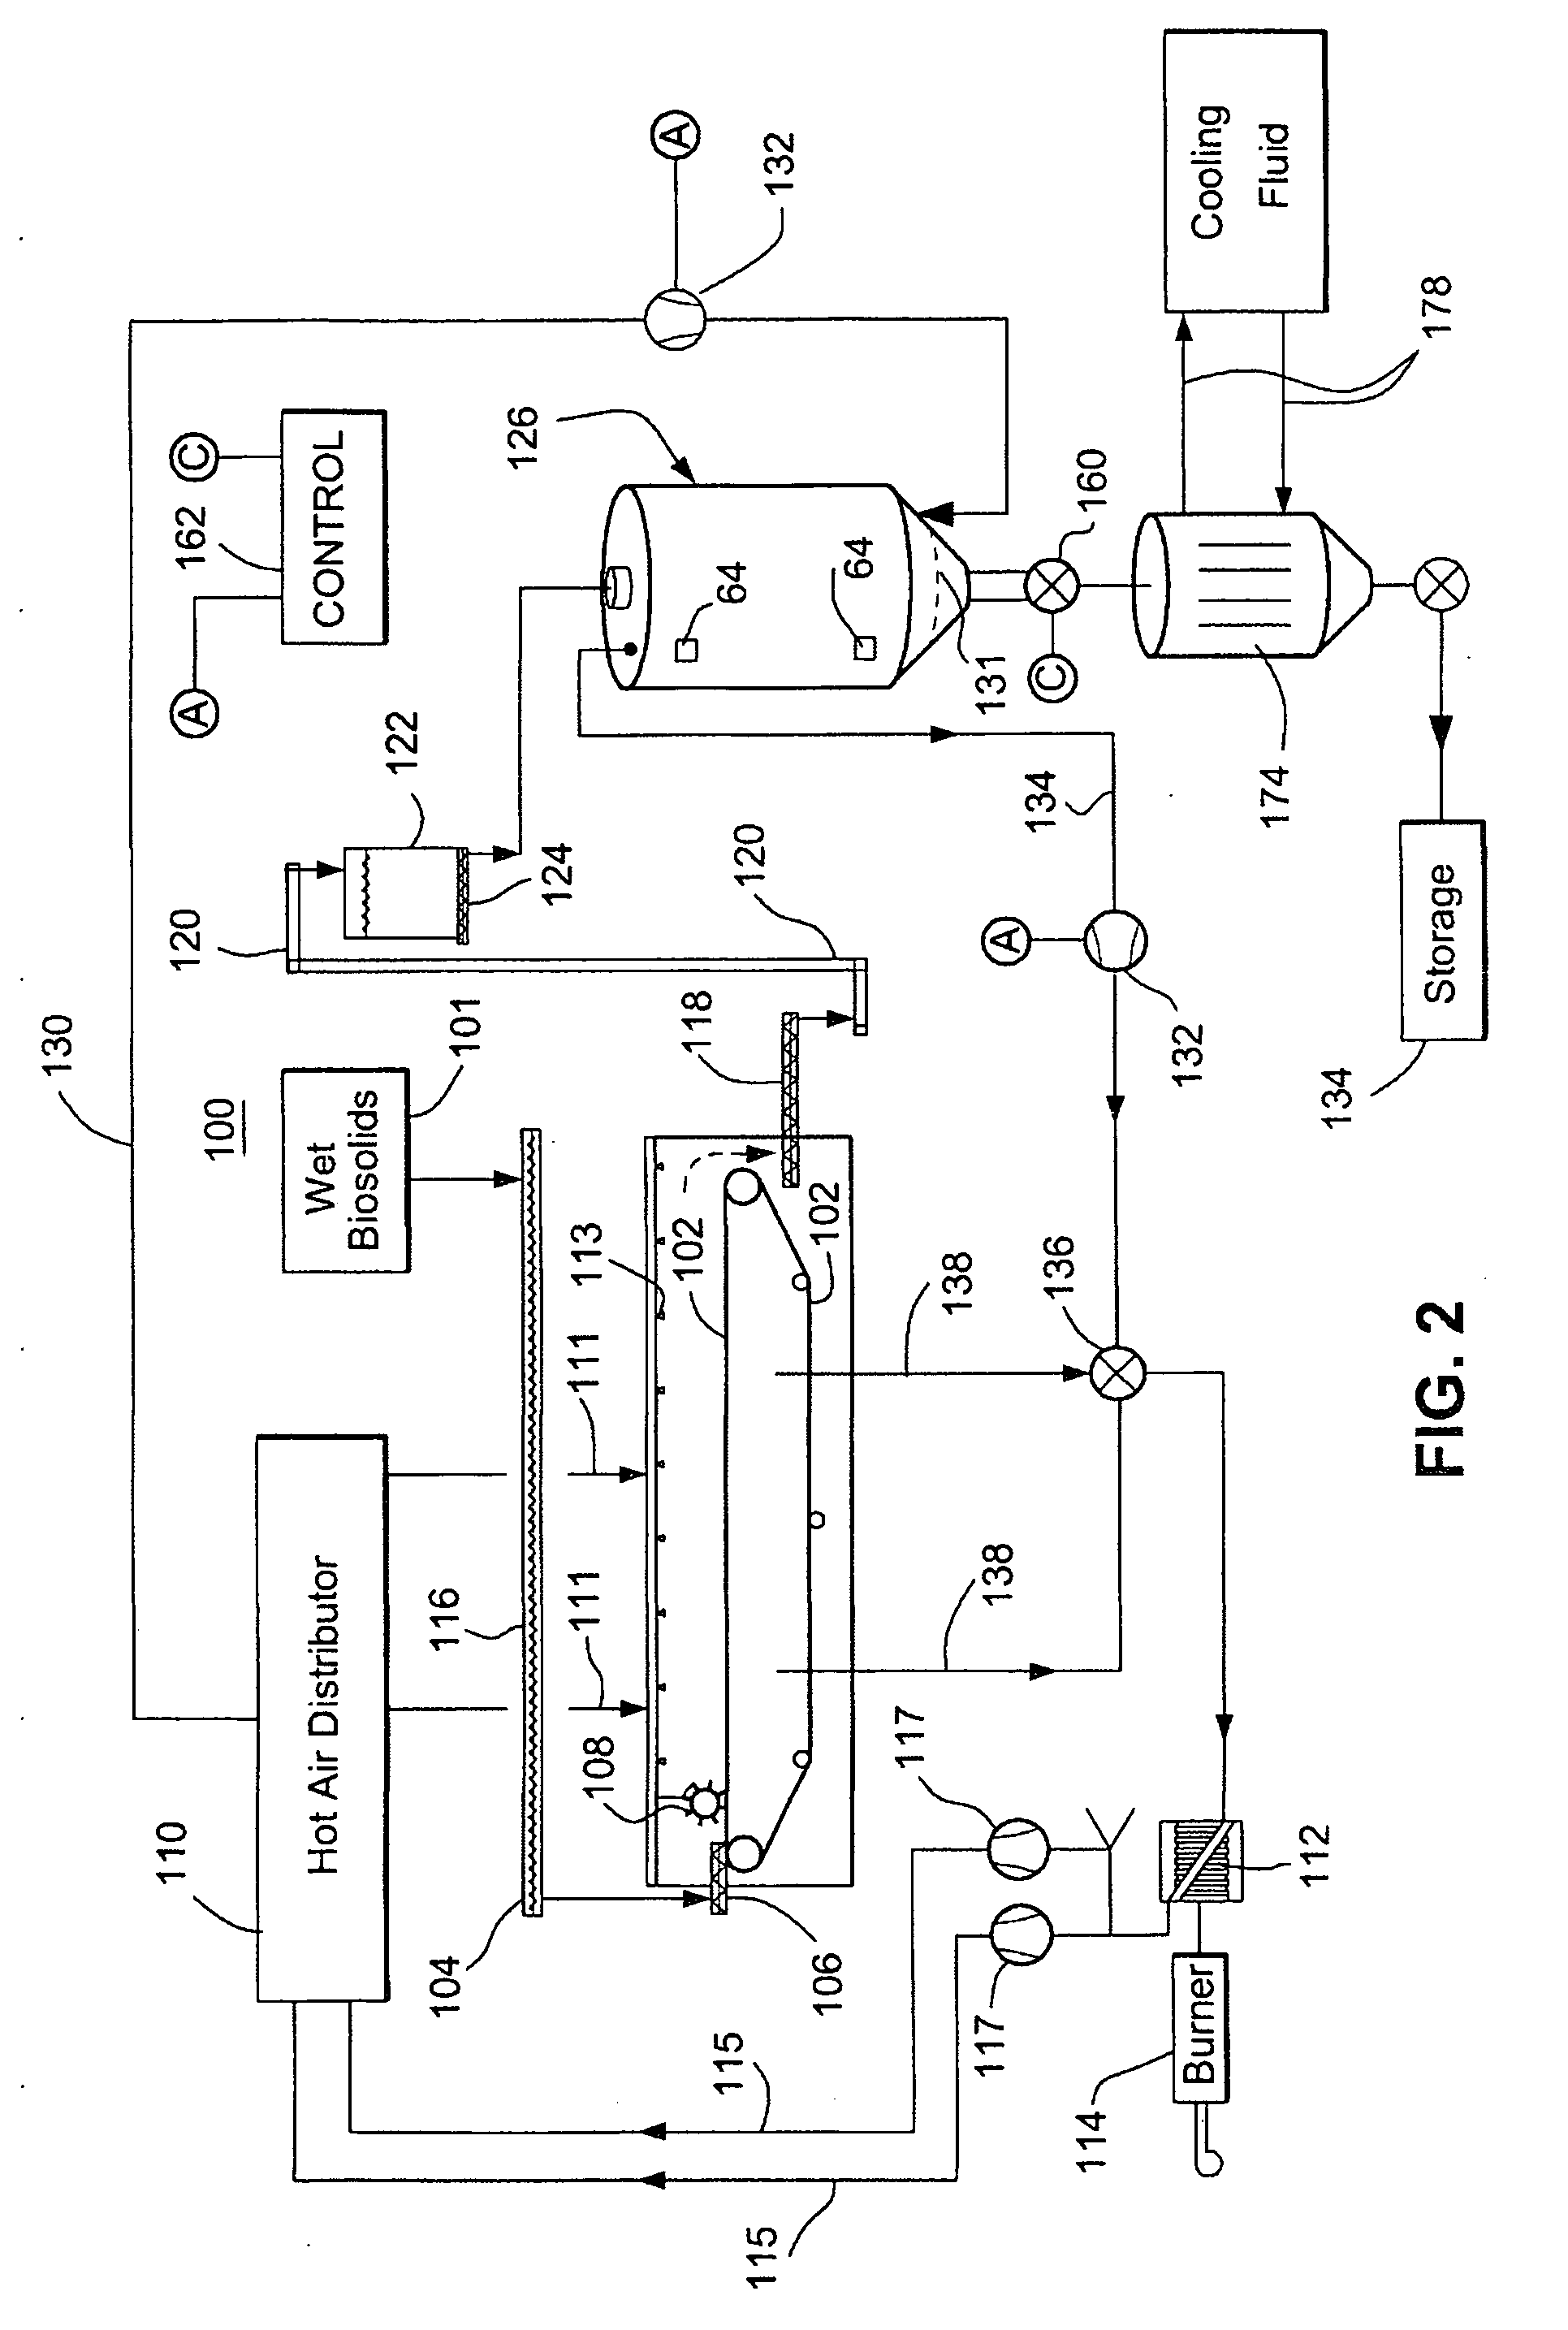 System and method for treatment of pathogens in dried sewage sludge